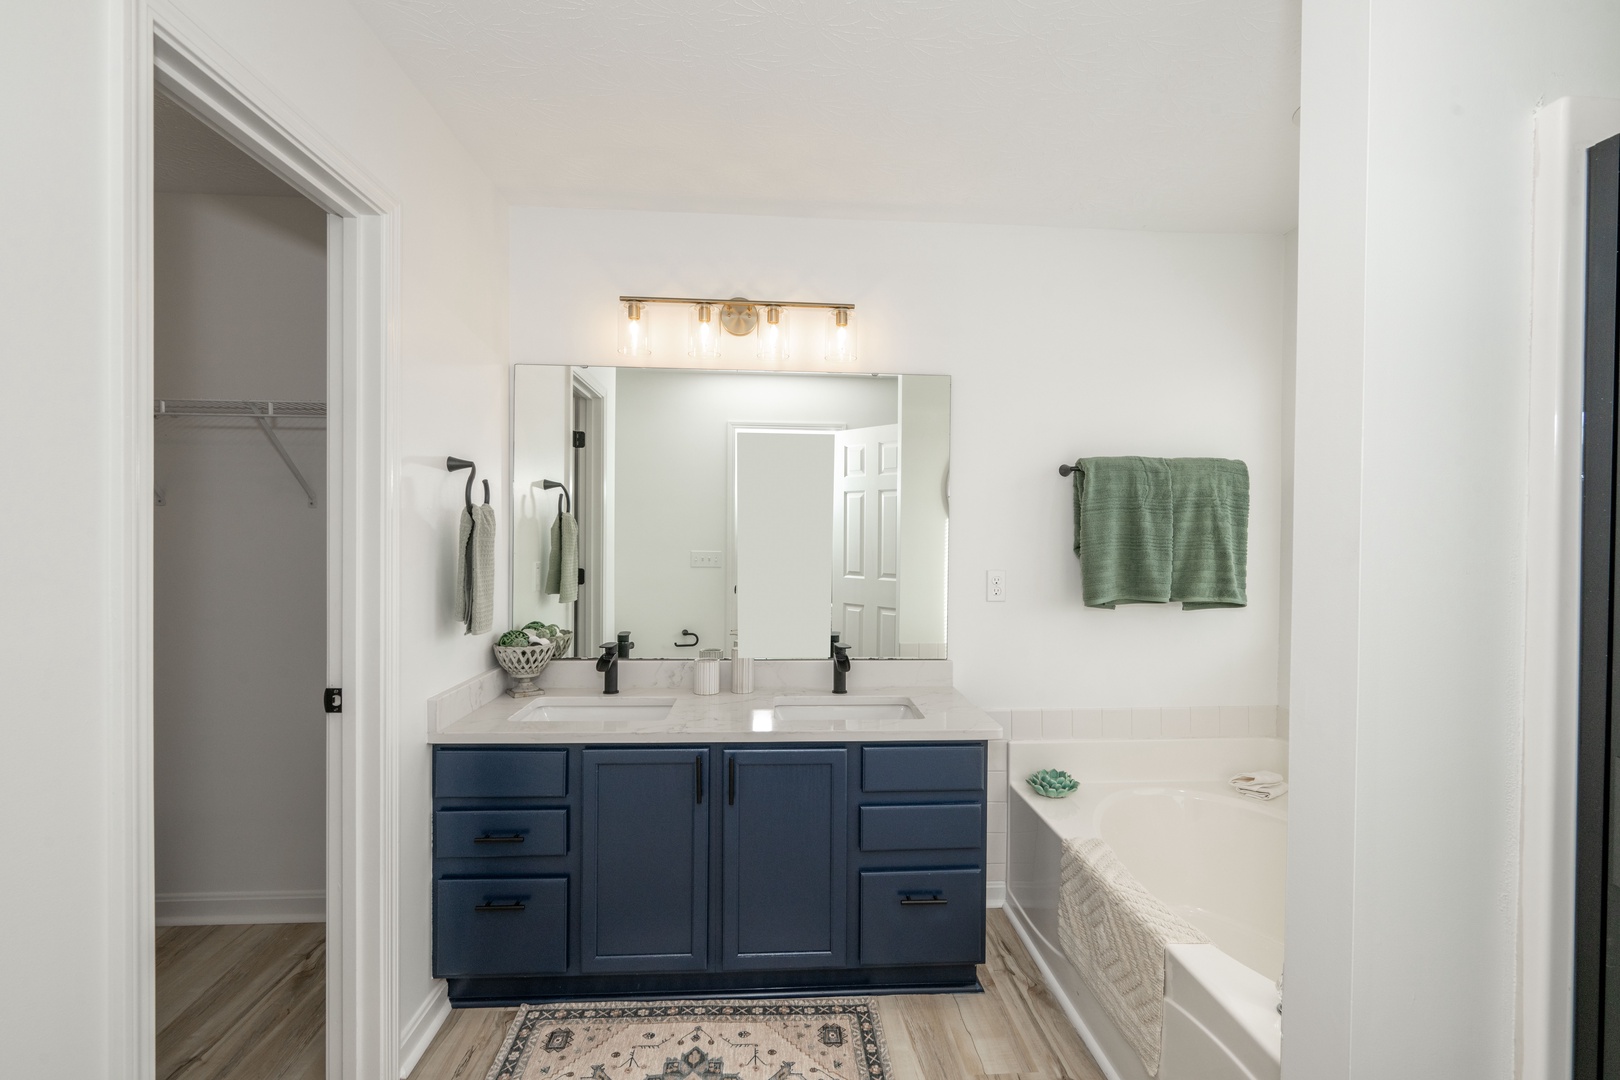 This full ensuite offers a double vanity, closet, soaking tub and shower